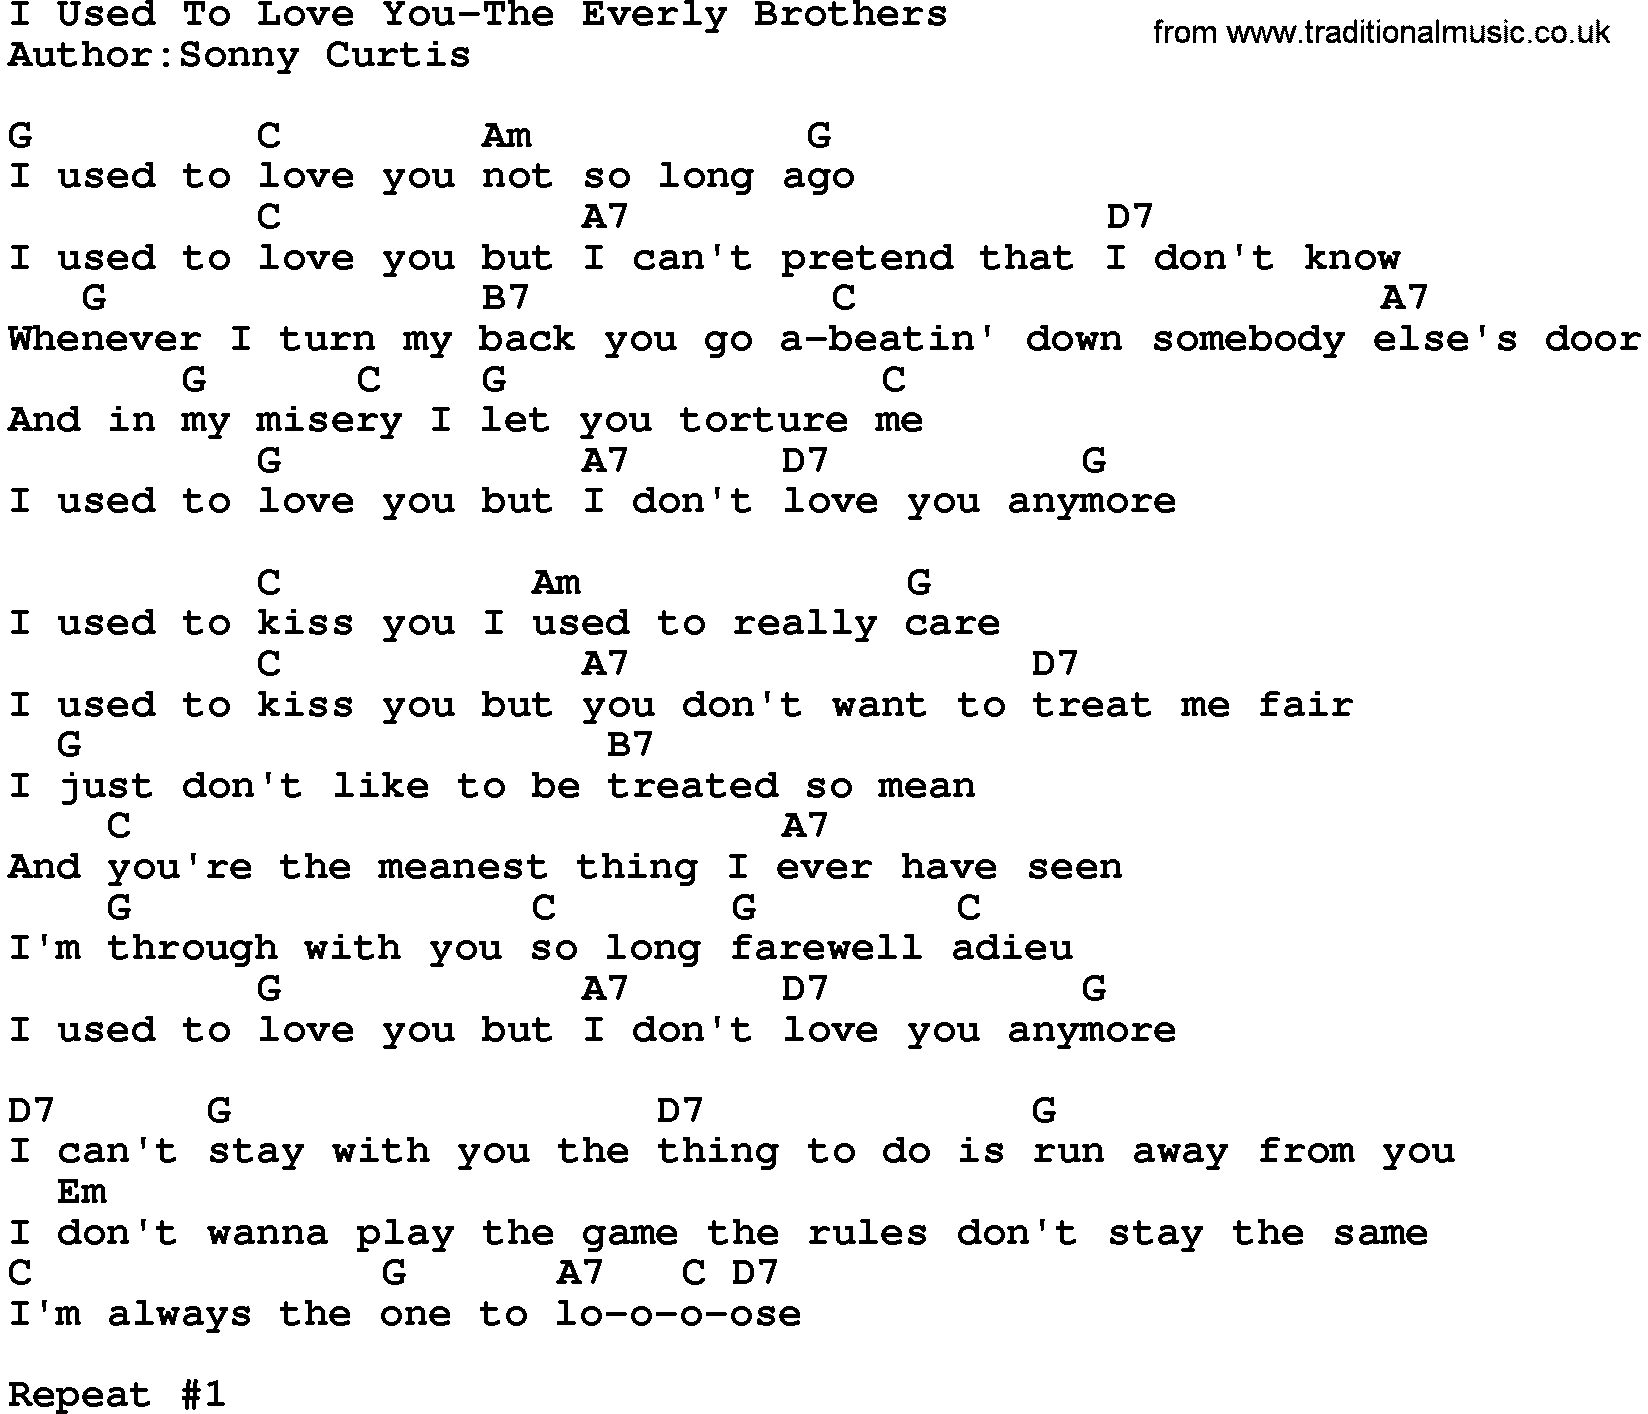 Country music song: I Used To Love You-The Everly Brothers lyrics and chords